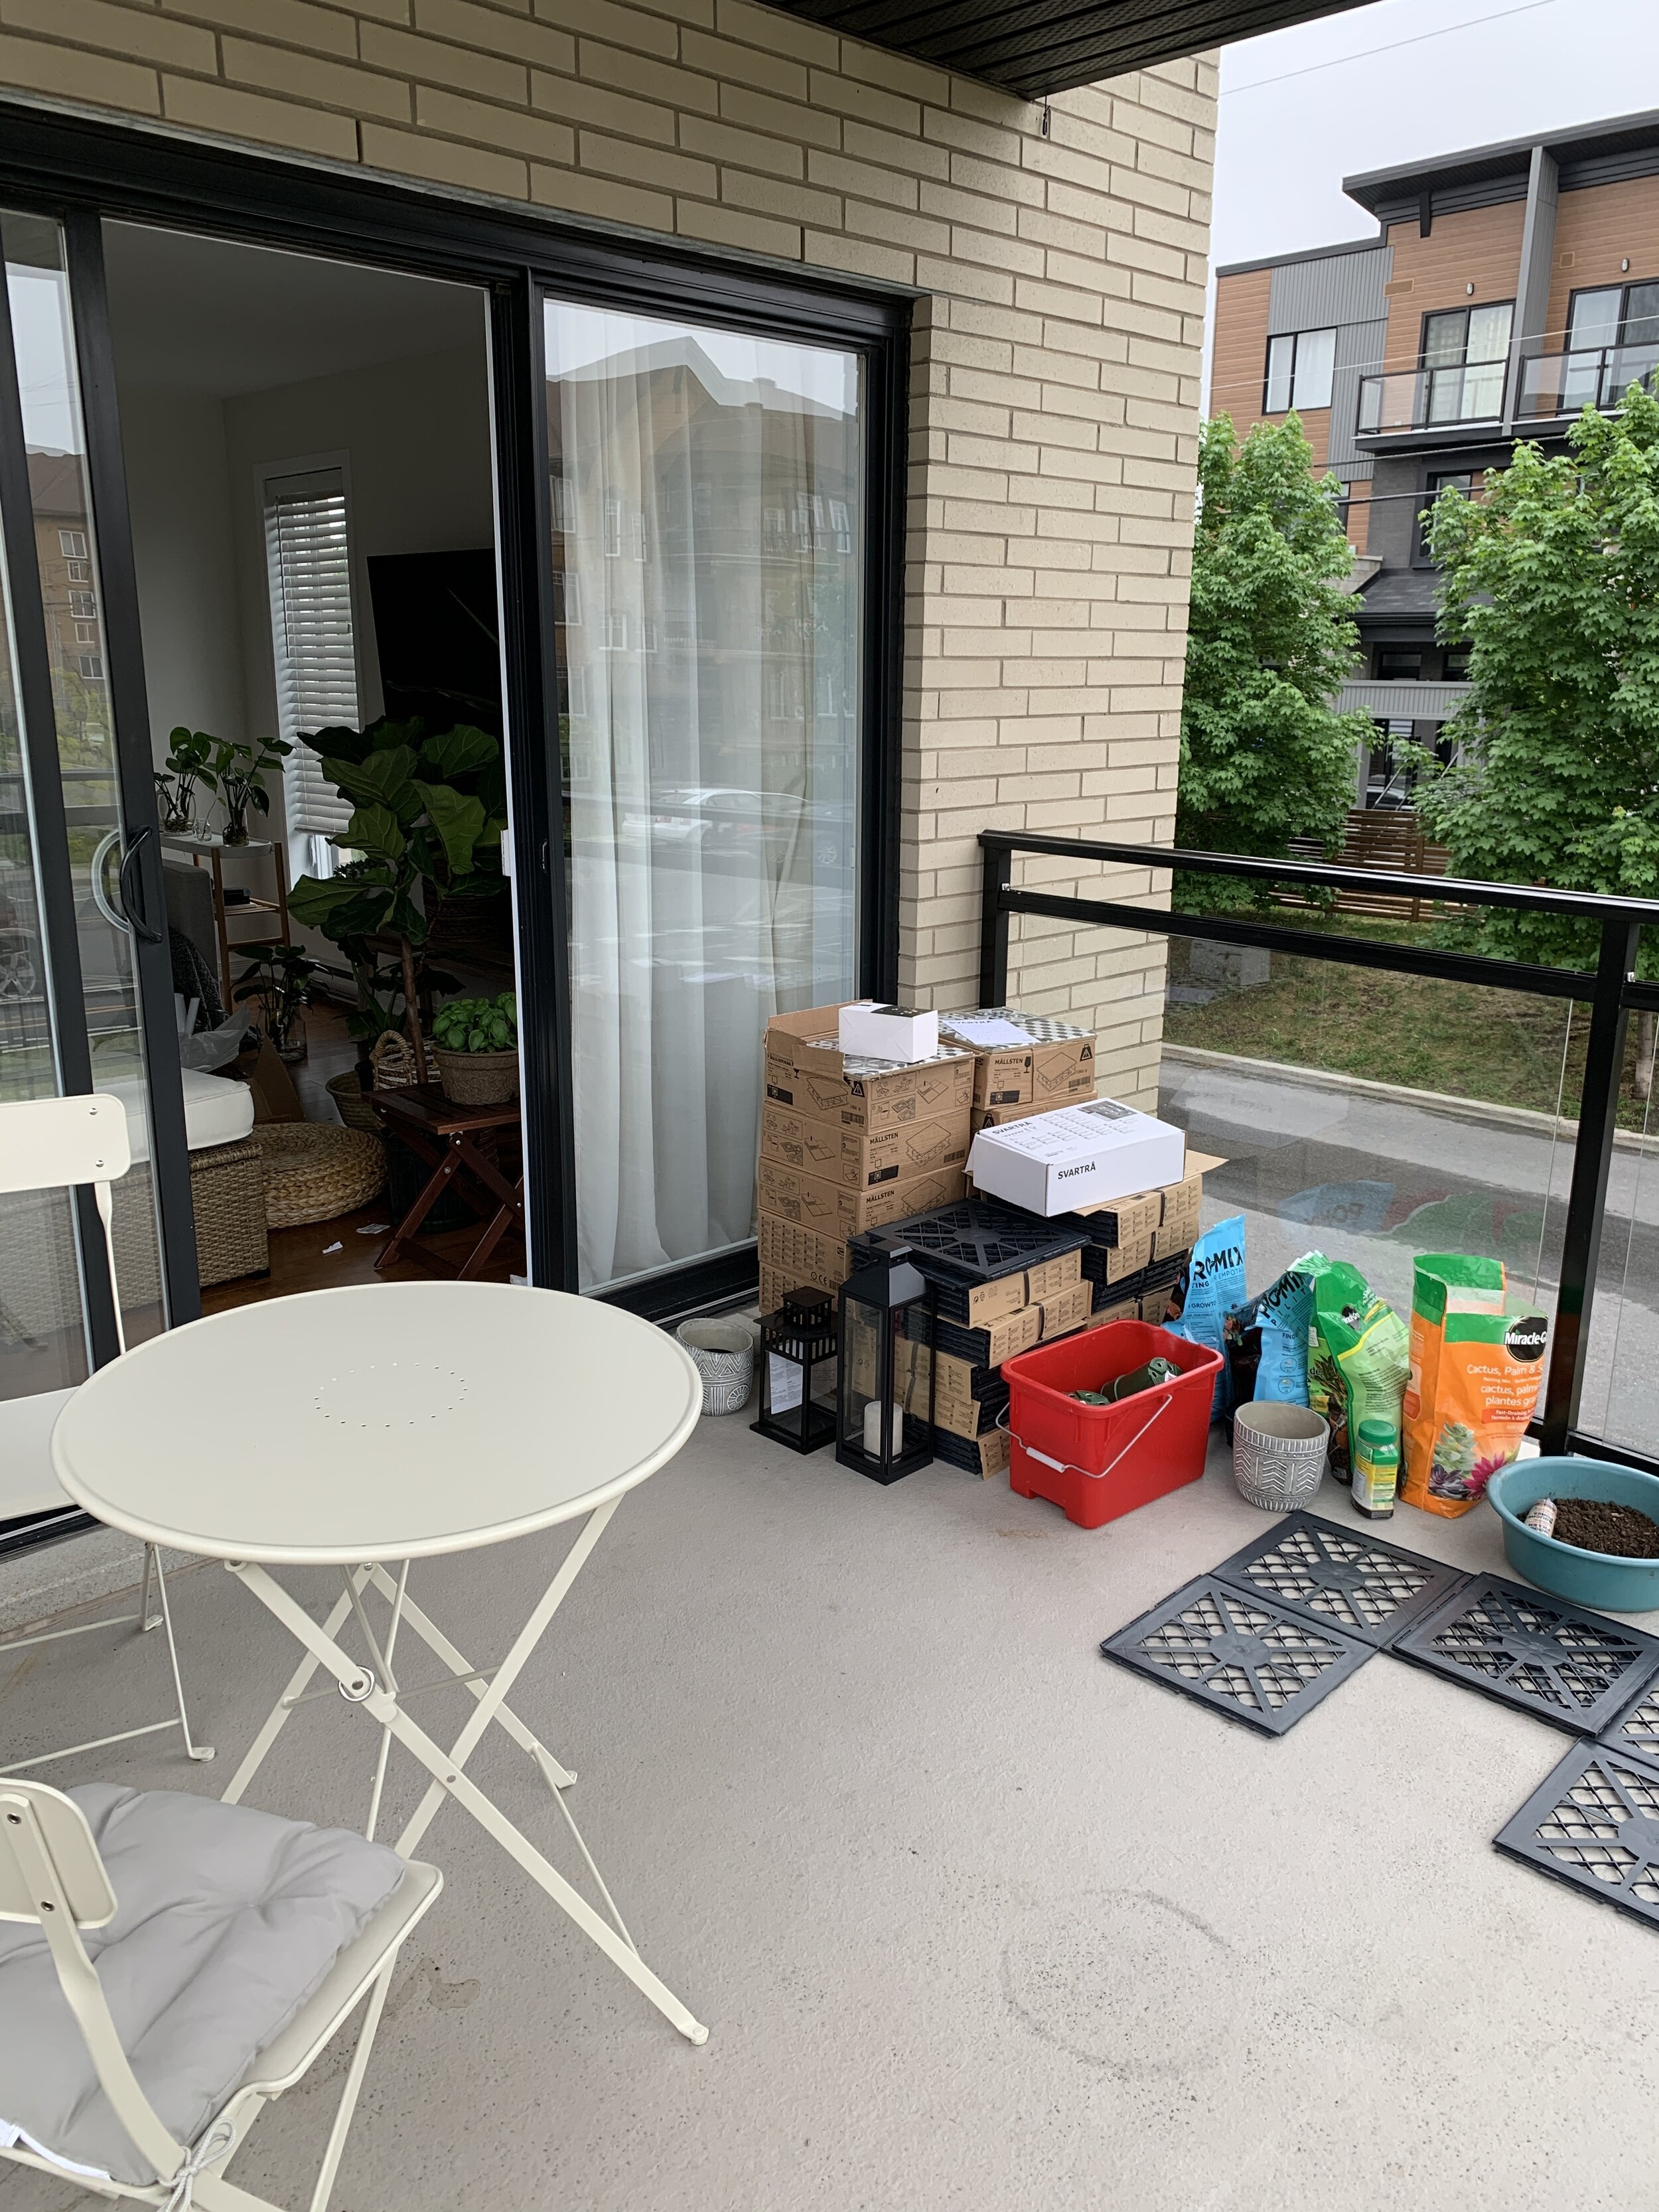  Get a condo balcony makeover idea with before and after images to create a balcony area you'll love to use to relax and entertain. #balcony #ikeamakeover | condo balcony ideas ikea | condo balcony ideas small | condo balcony ideas decor | condo balc